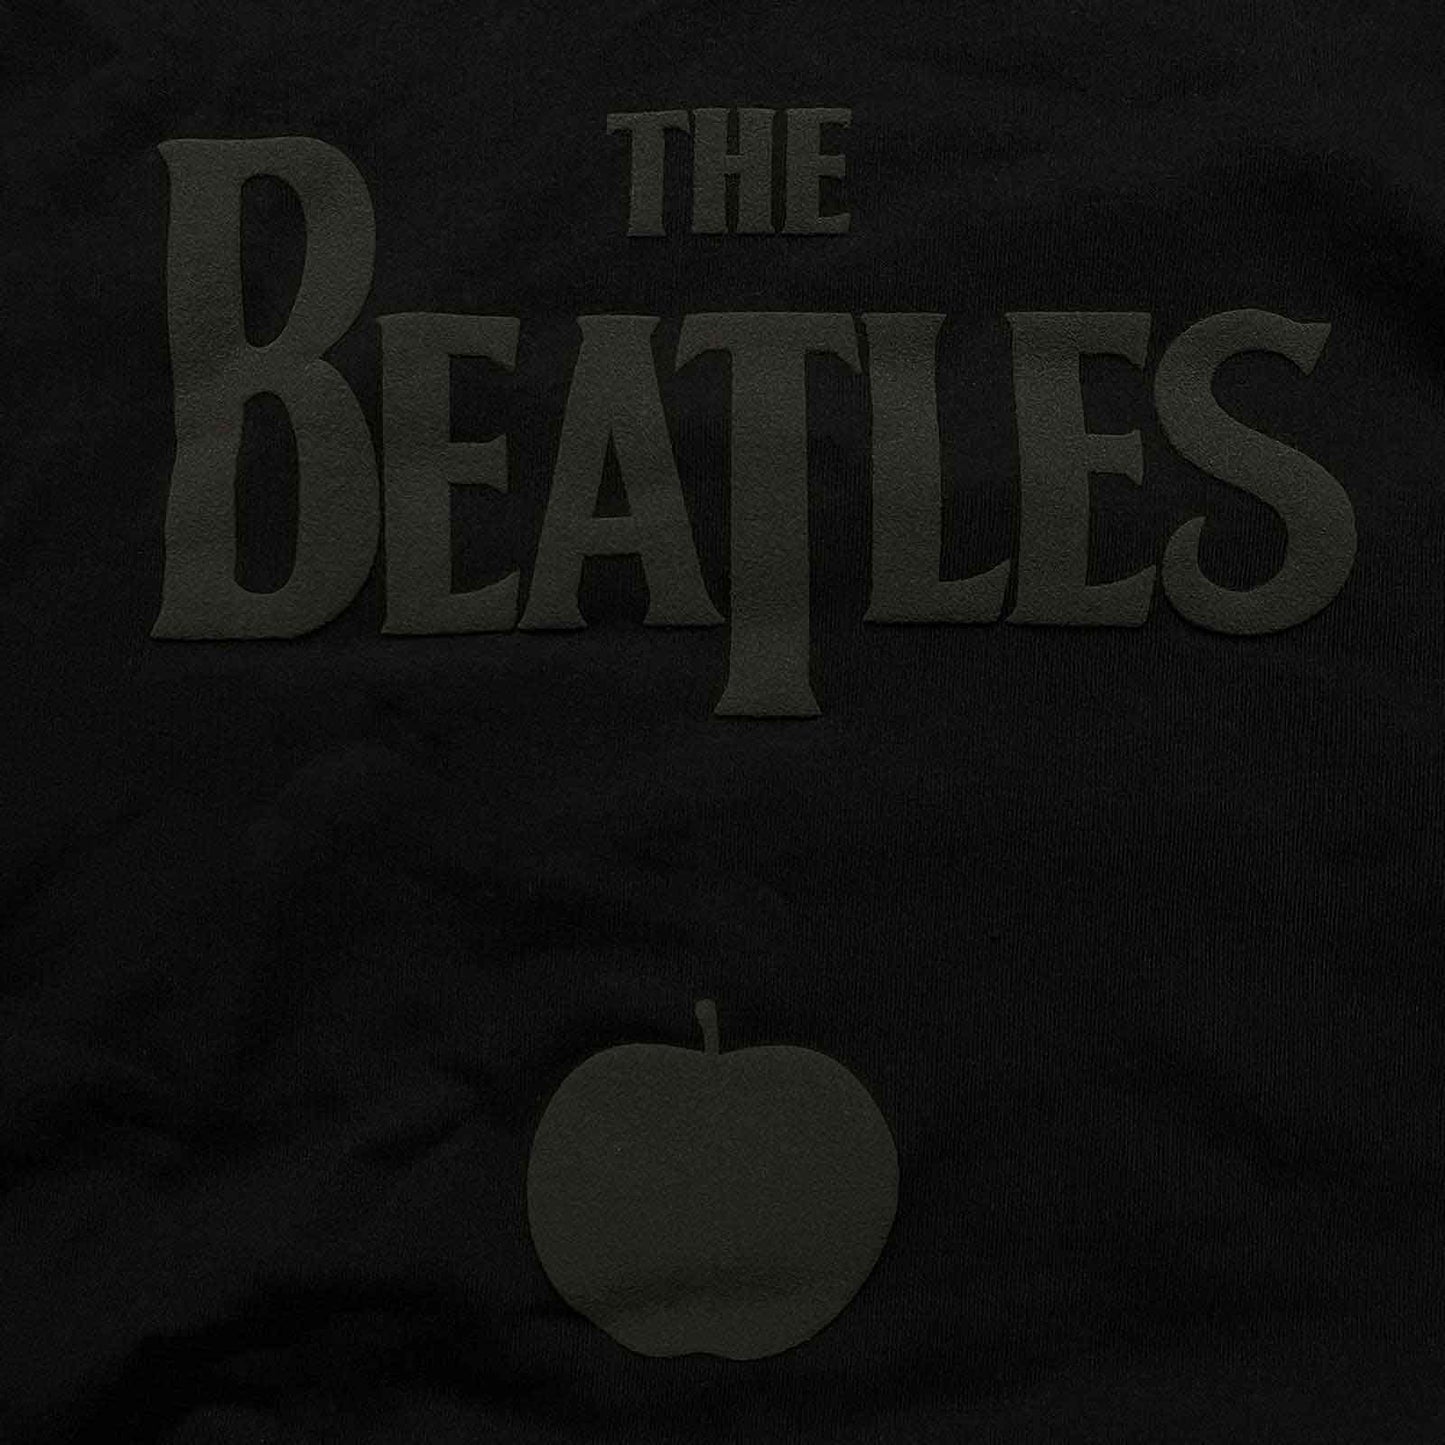 The Beatles Drop T and Apple Logo Pullover Hoodie